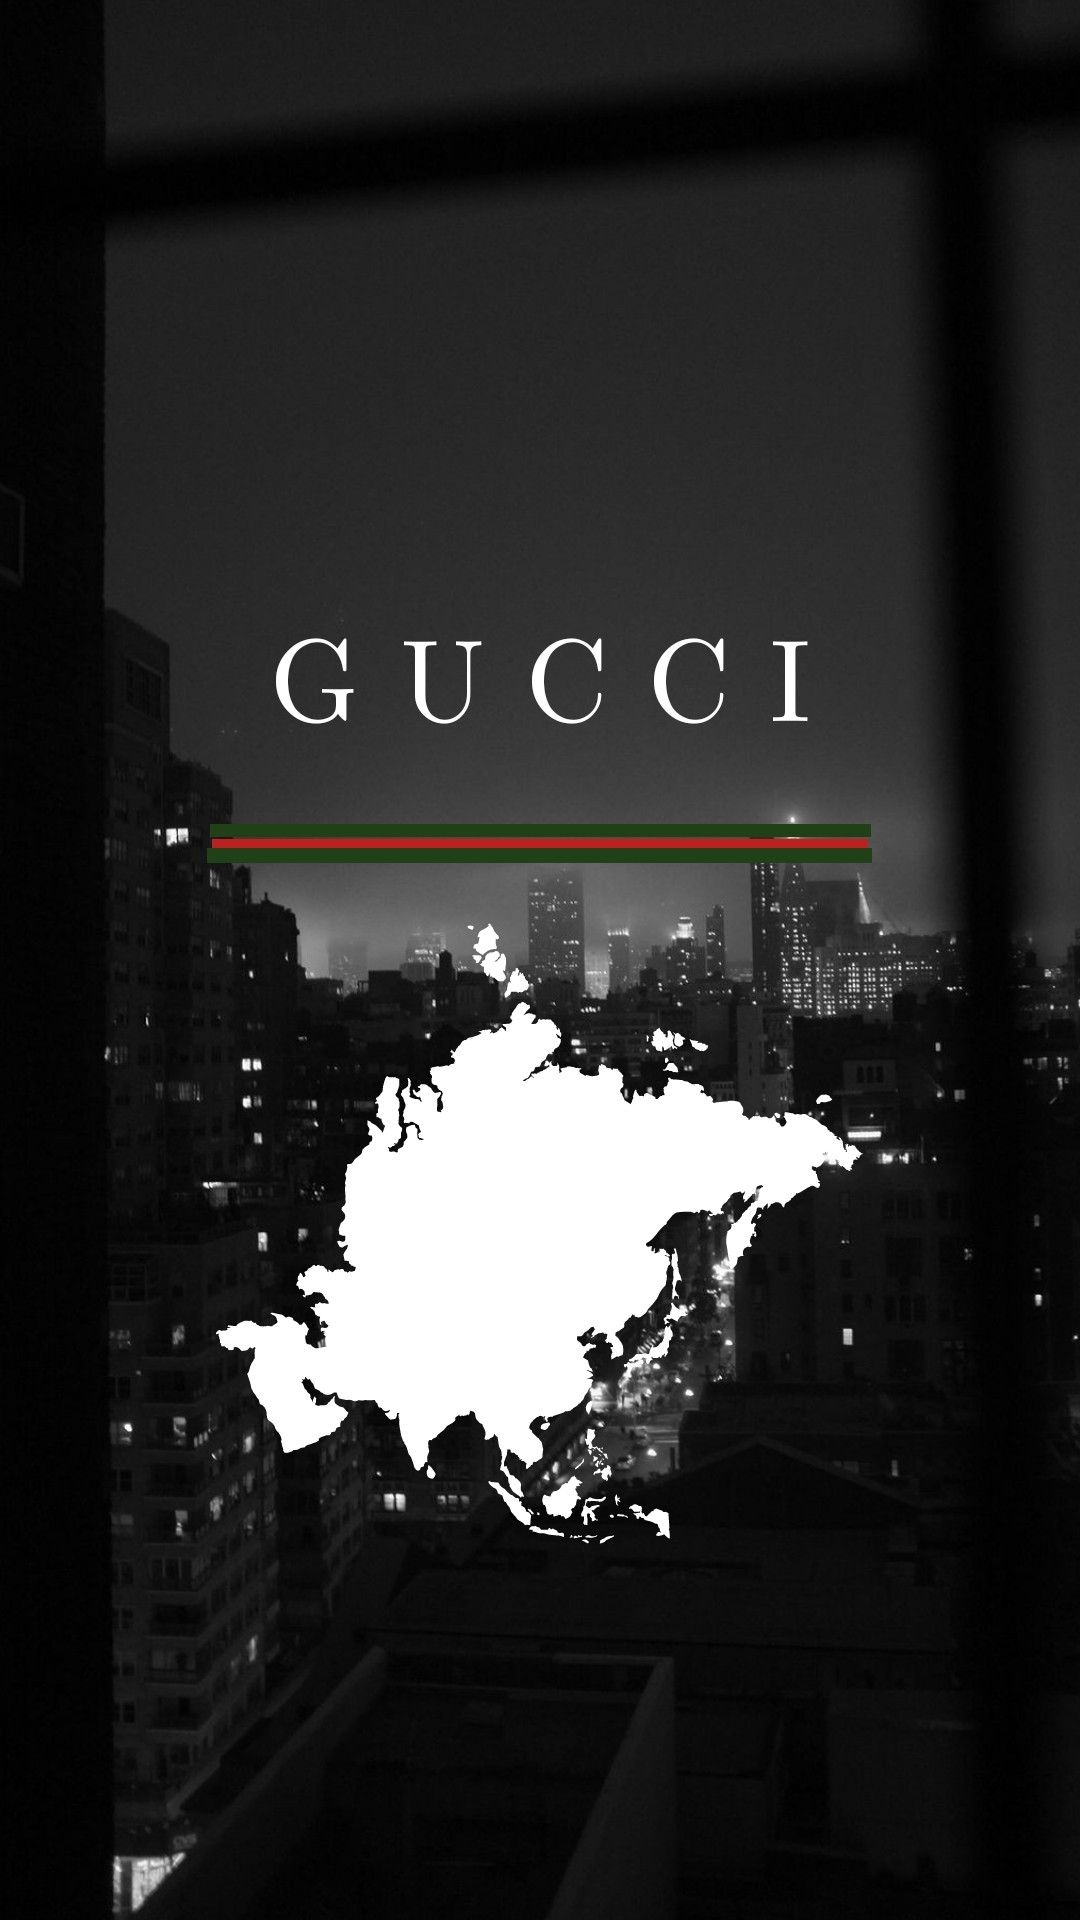 Aesthteic Gucci Logo Wallpaper